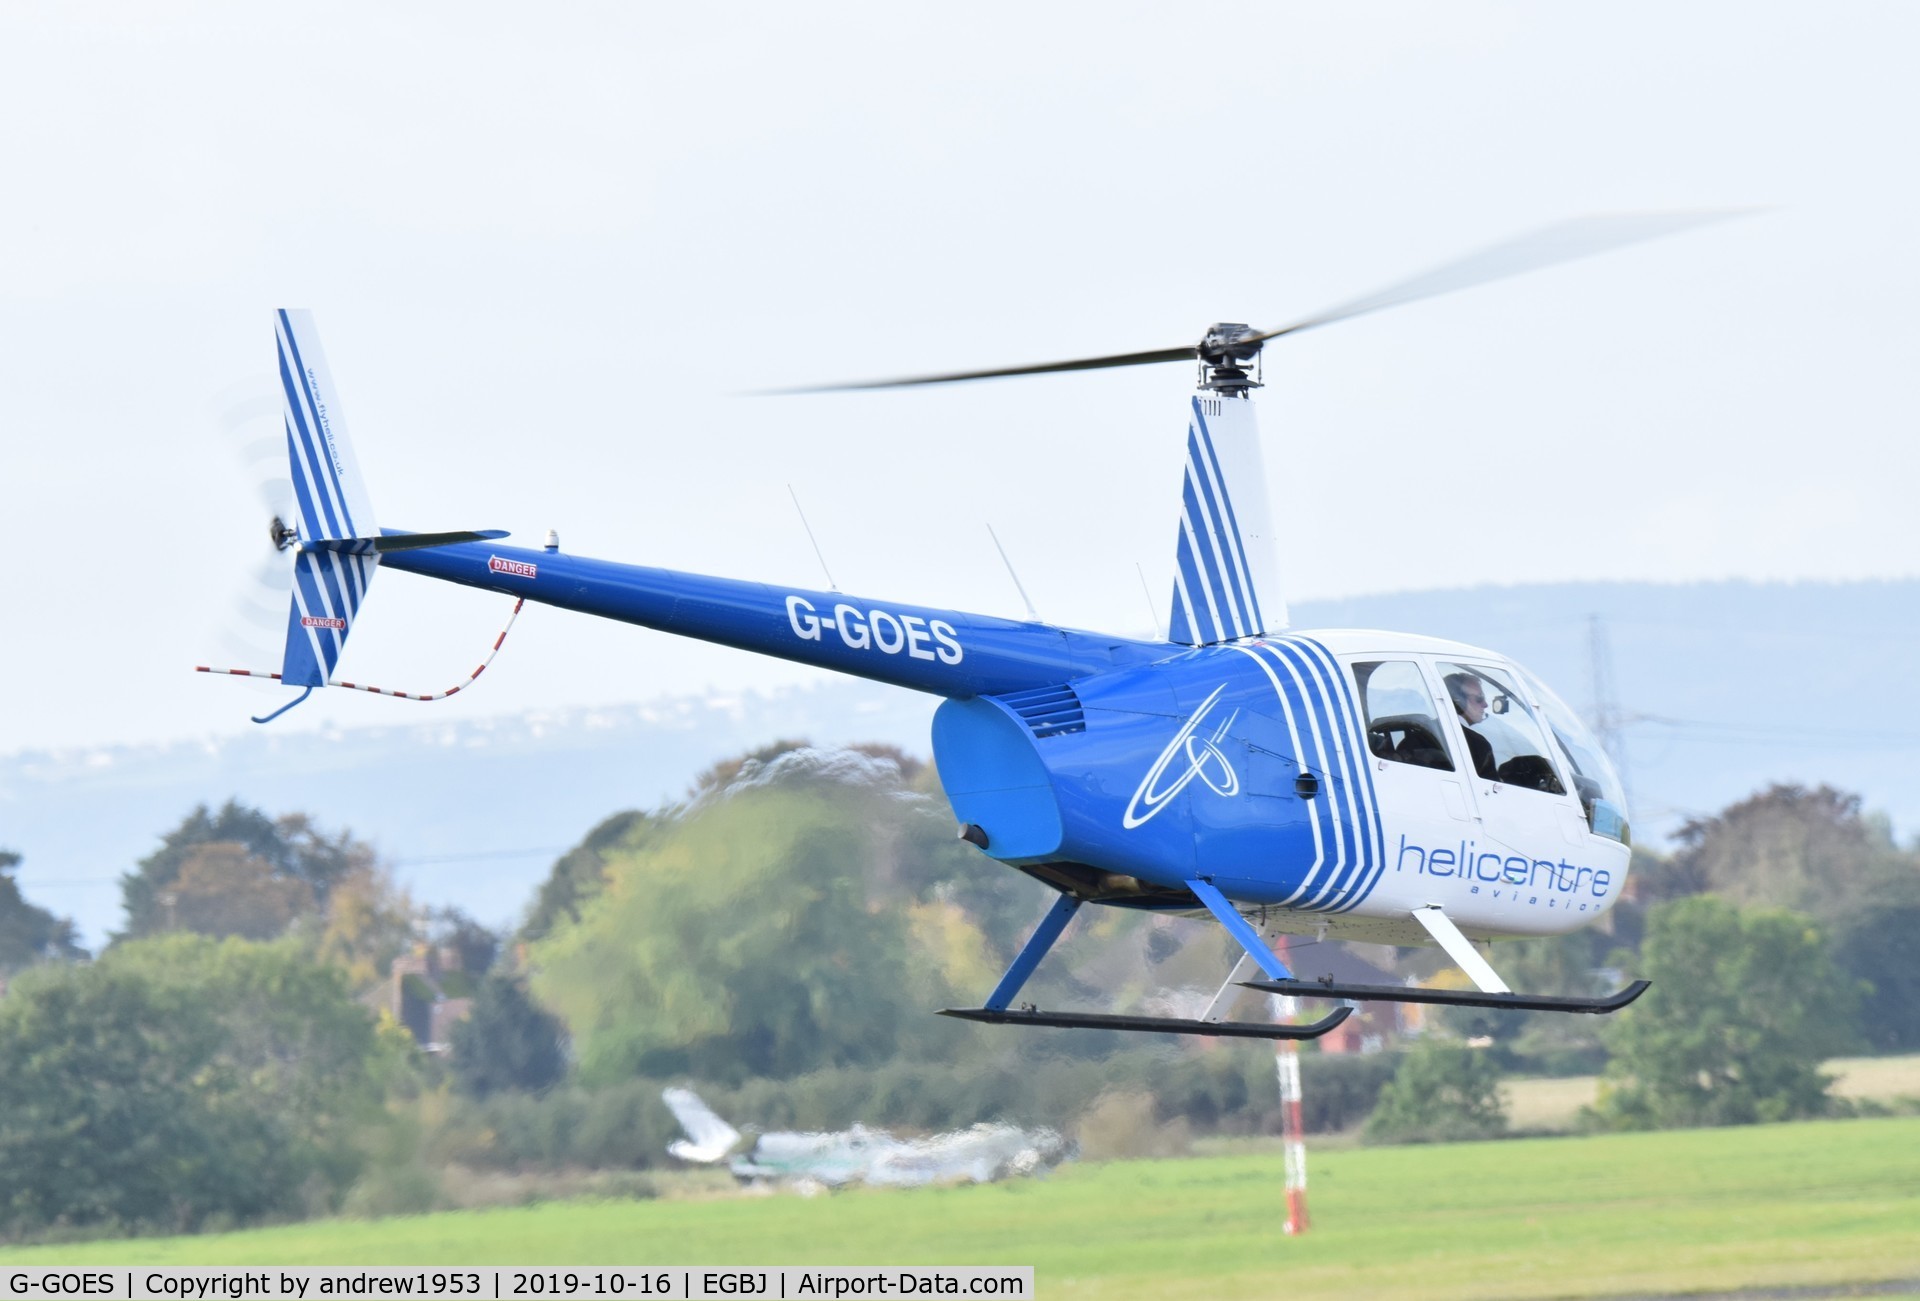 G-GOES, 2005 Robinson R44 Raven II C/N 10942, G-GOES at Gloucestershire Airport.